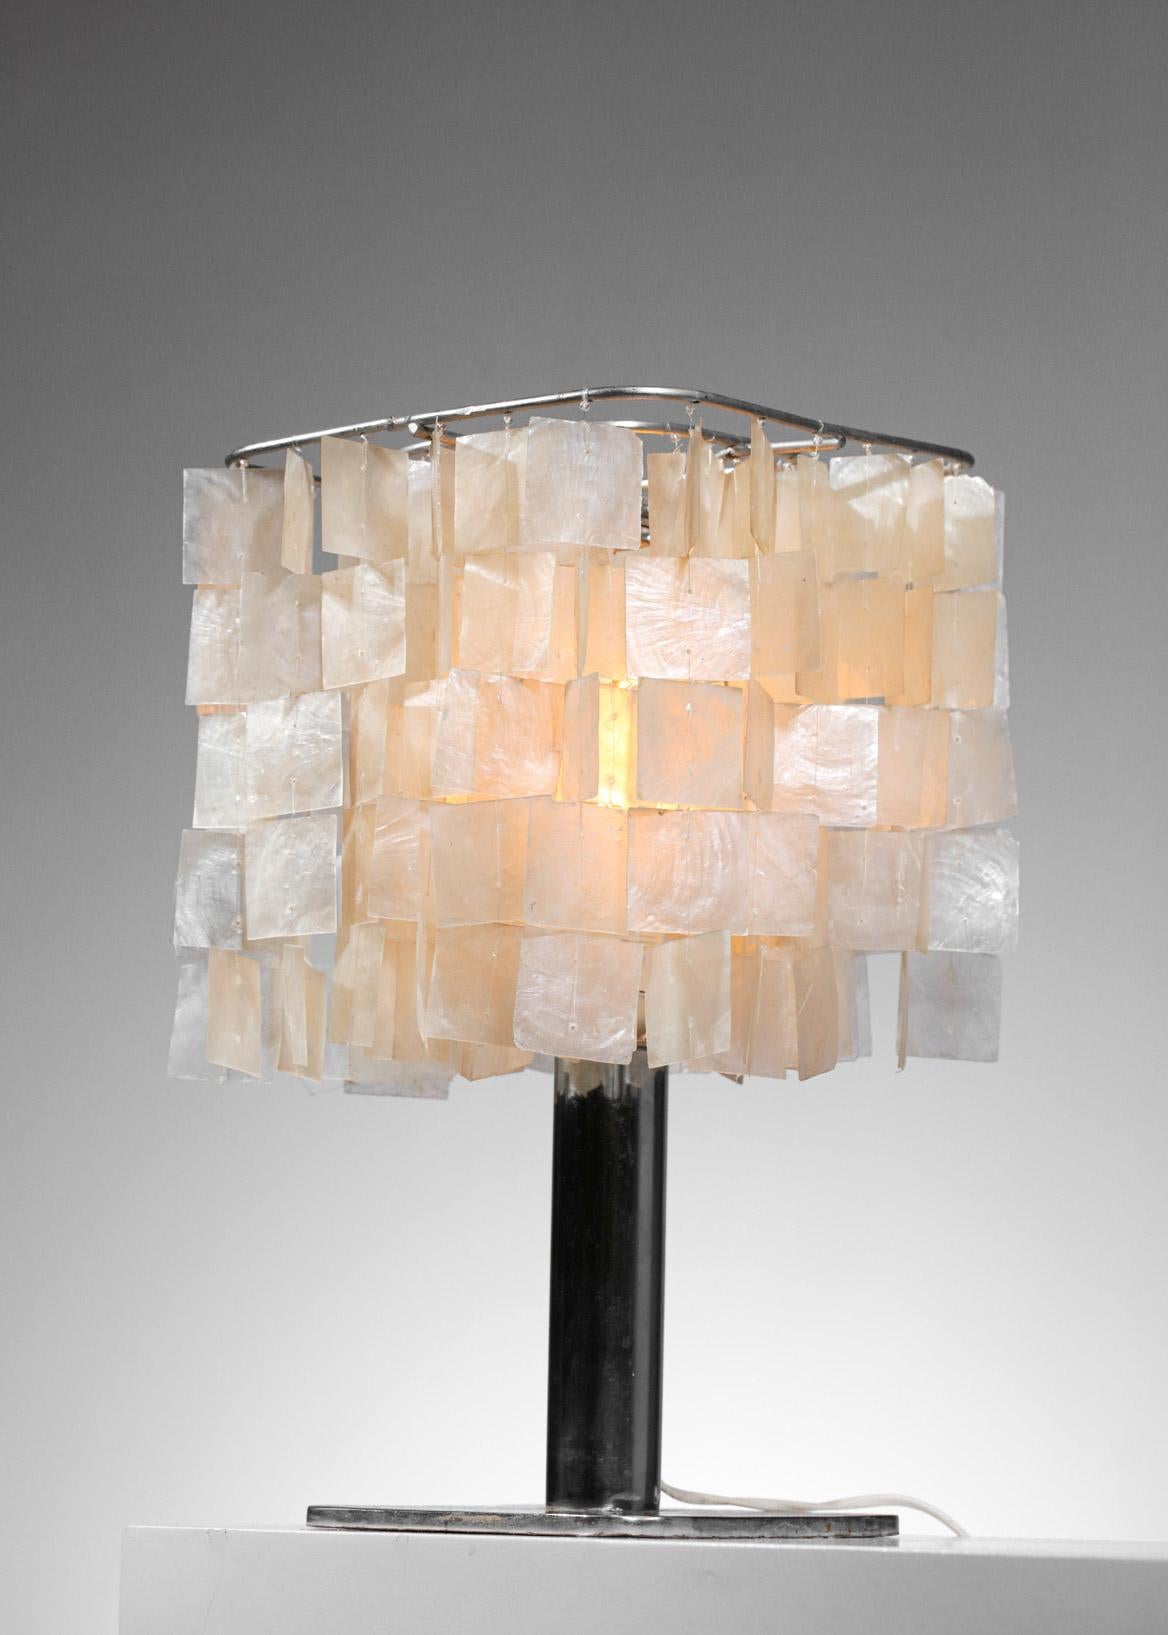 Unique Handmade Table Lamp in Mother of Pearl 70s Style Verner Panton G220 For Sale 5